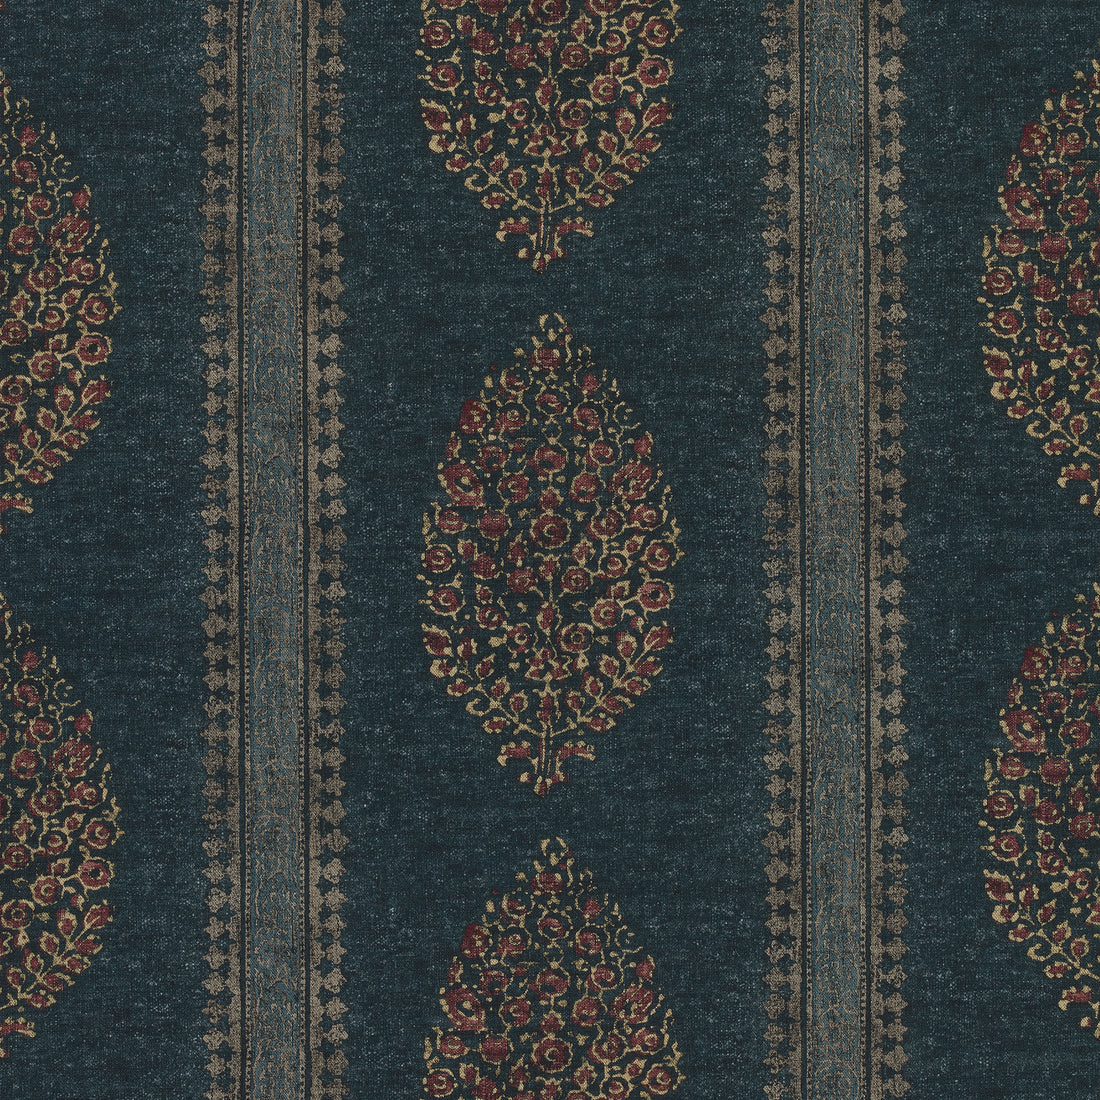 Chappana fabric in navy and red color - pattern number F910238 - by Thibaut in the Colony collection